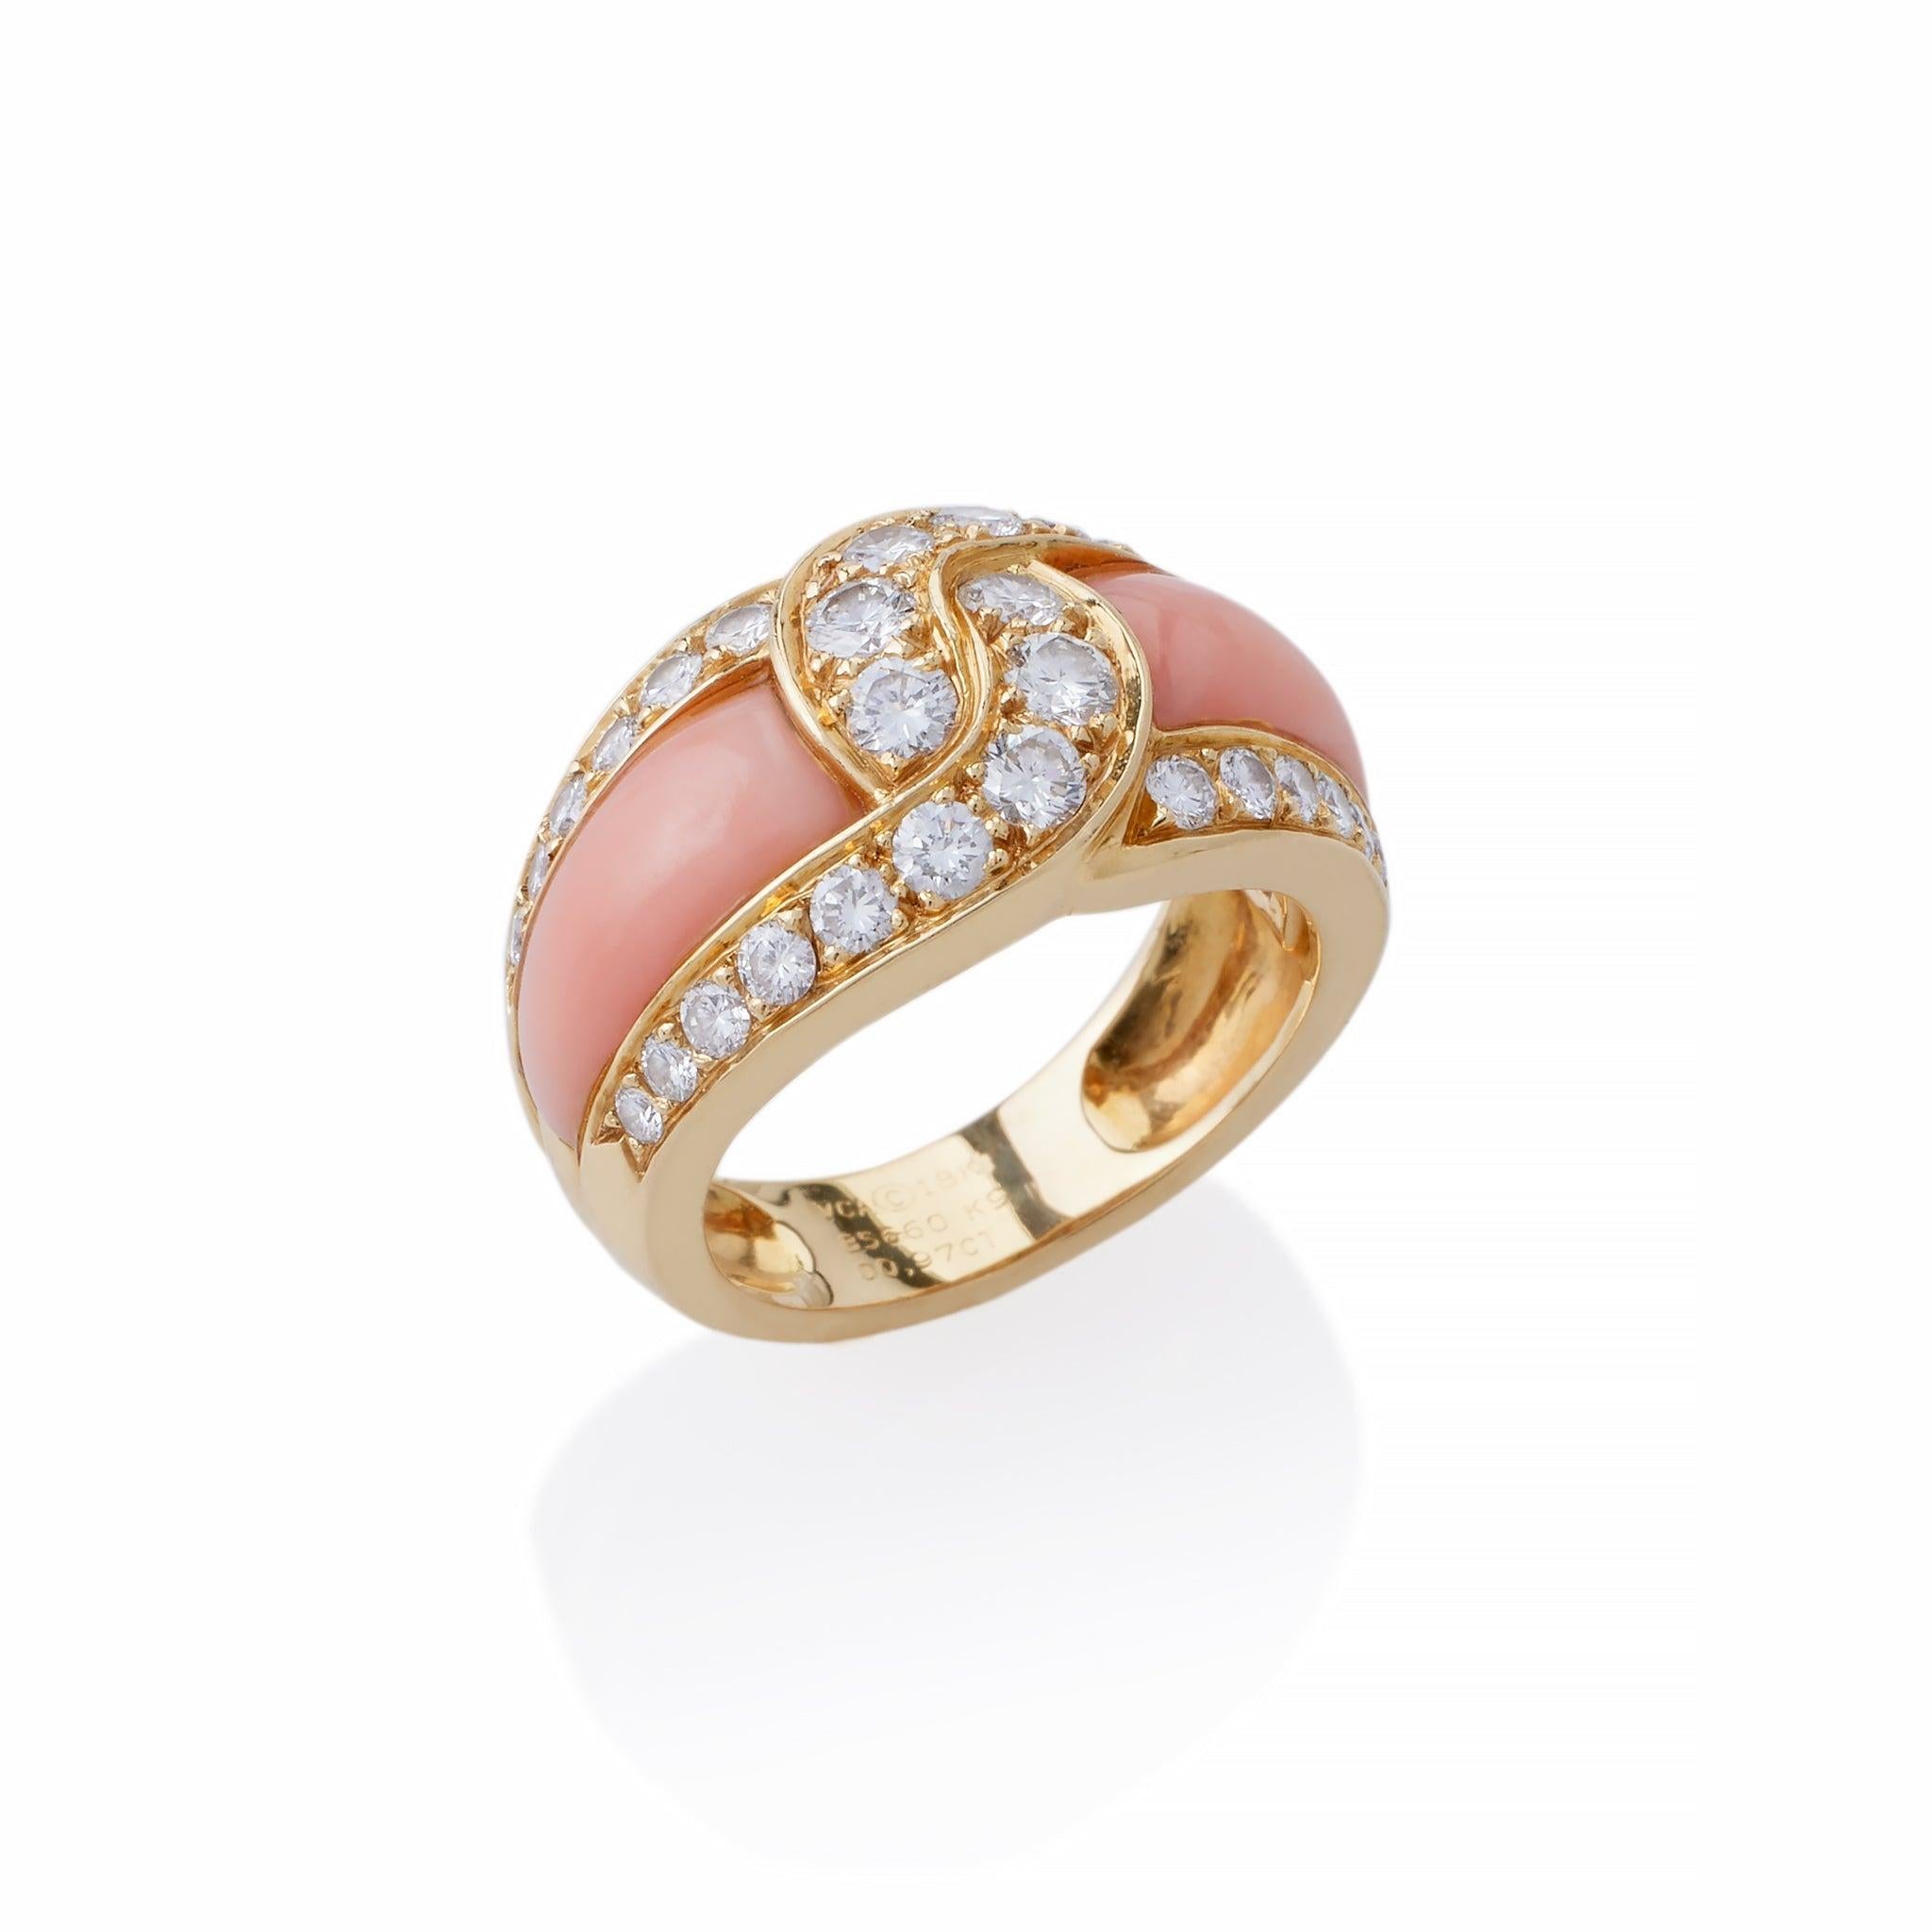 Dating from the 1980s, this 18K gold Van Cleef & Arpels ring is set with angel skin coral and diamonds. The ring features interlocking curved bands of round brilliant cut diamonds continuing along both edges, and framing shaped, pale orange coral